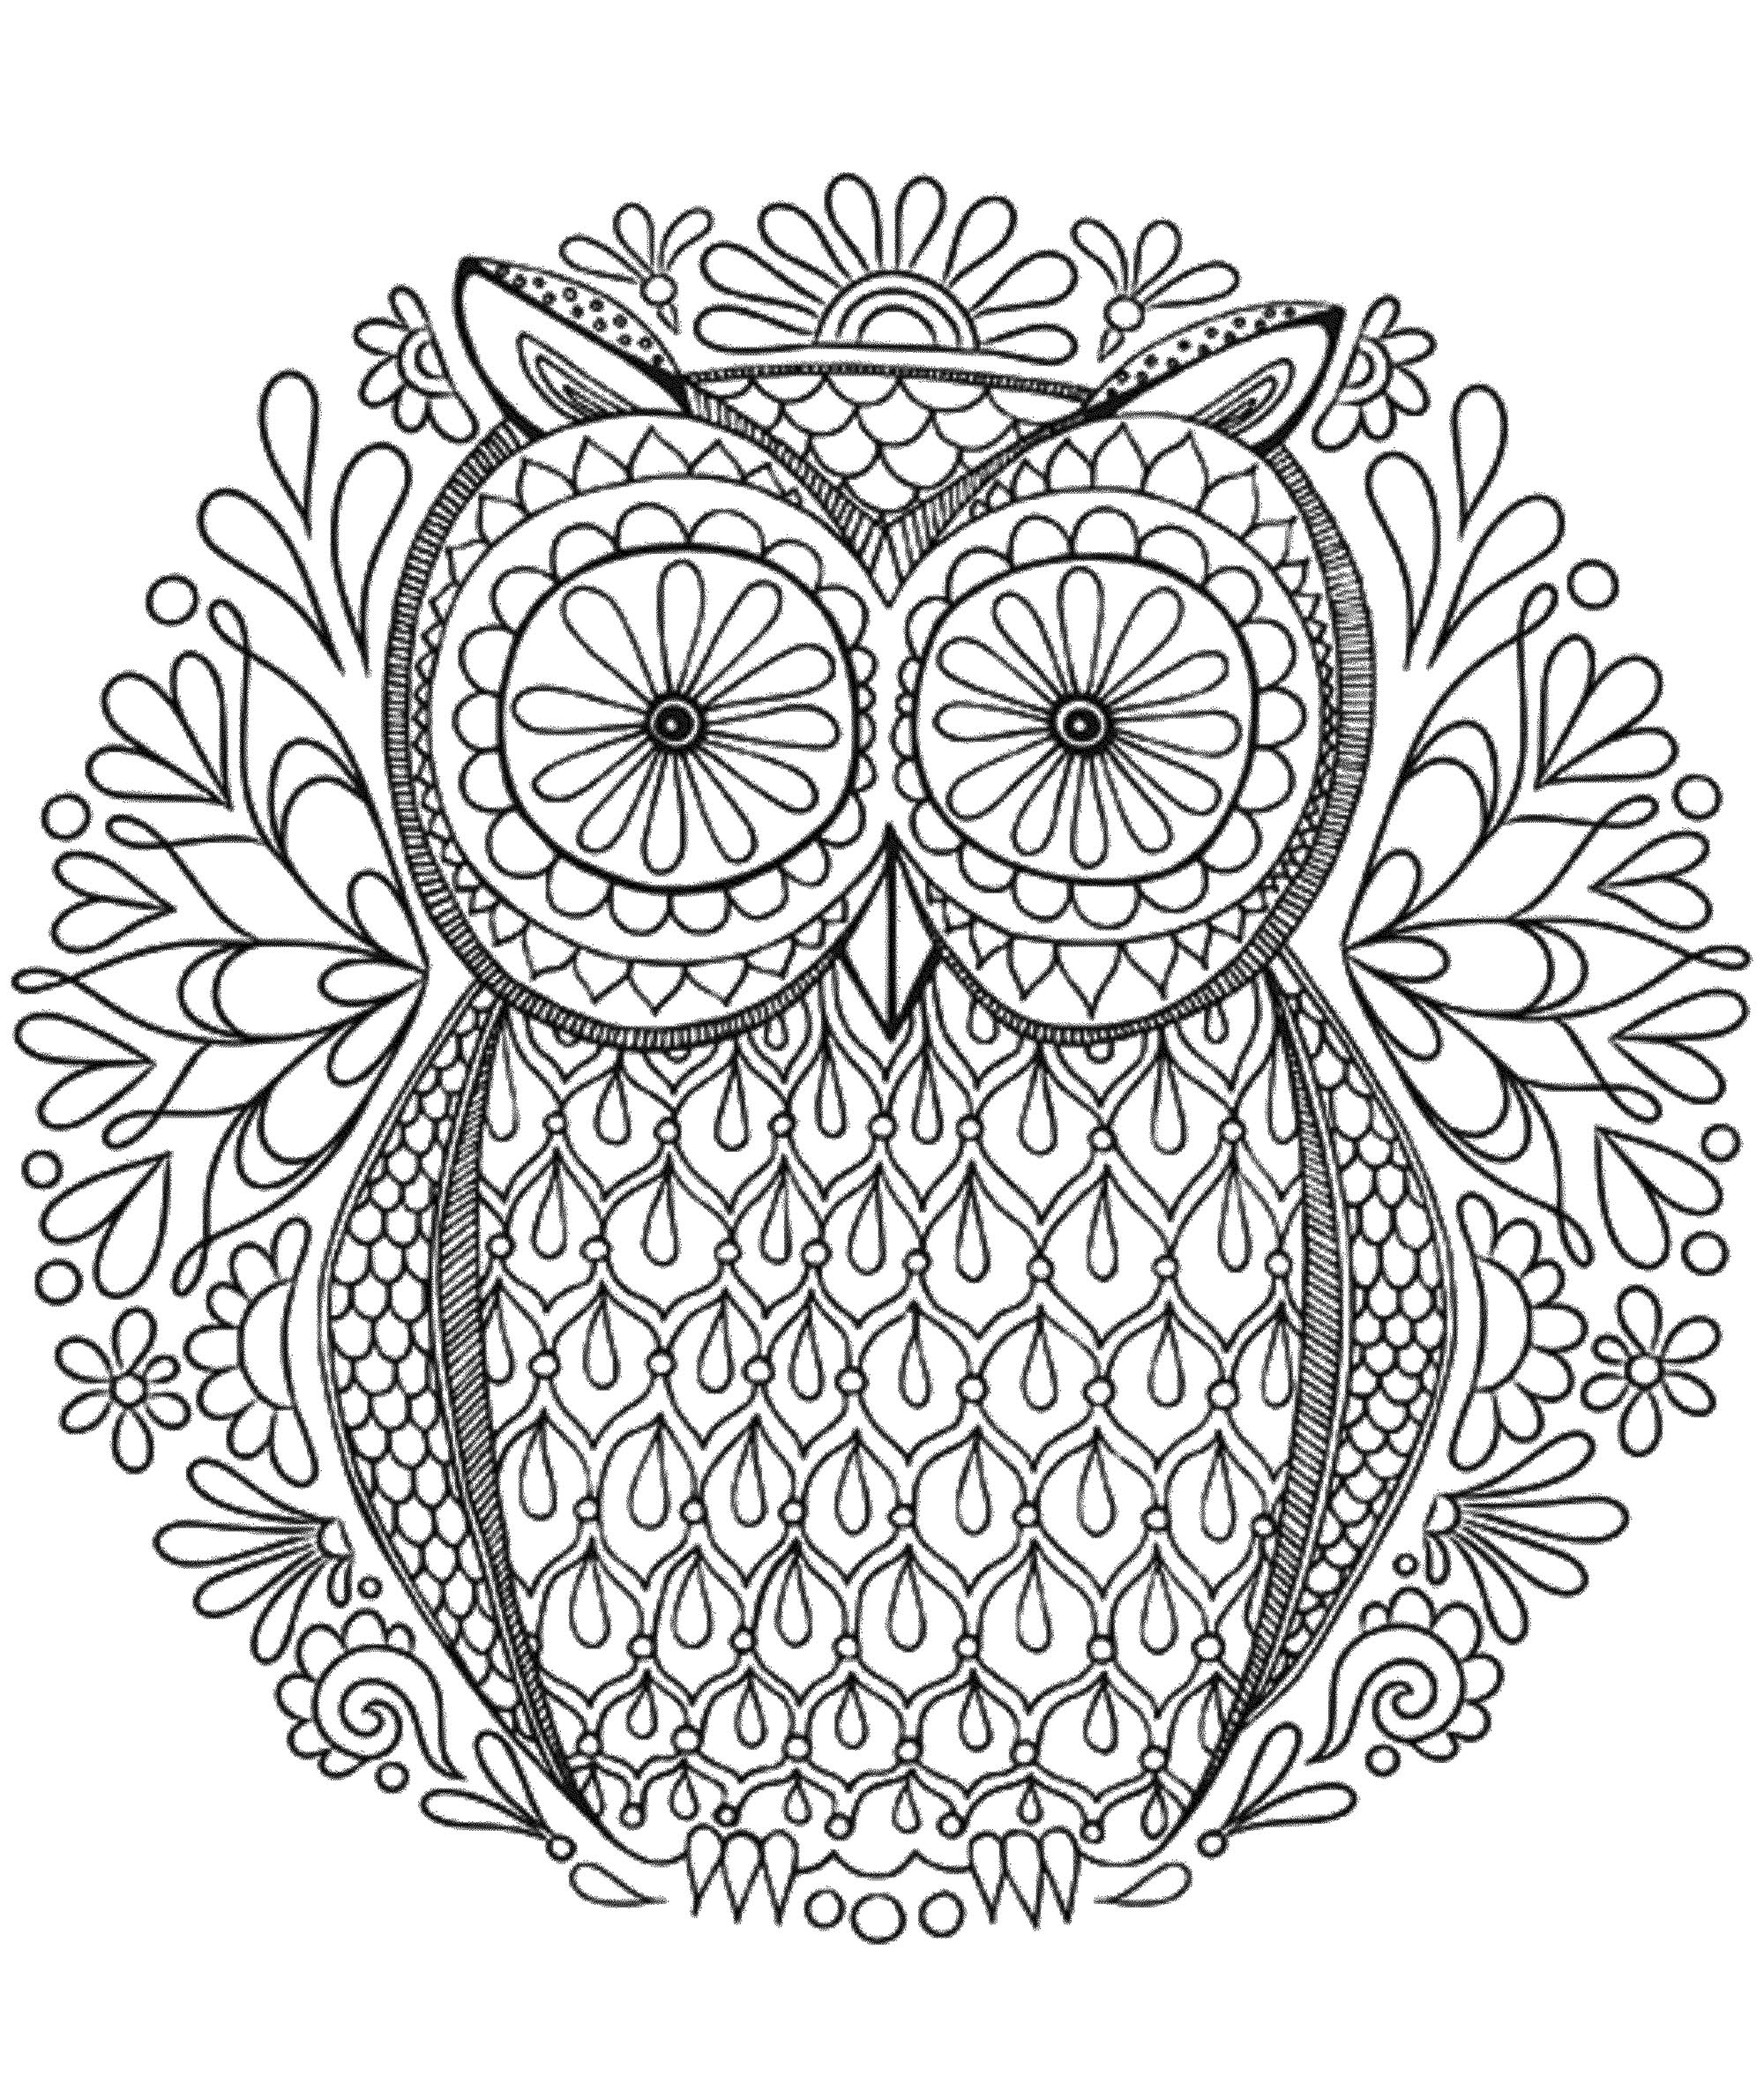 A beautiful Mandala coloring page with a beautiful owl, of great quality and originality. It's up to you to choose the most appropriate colors.